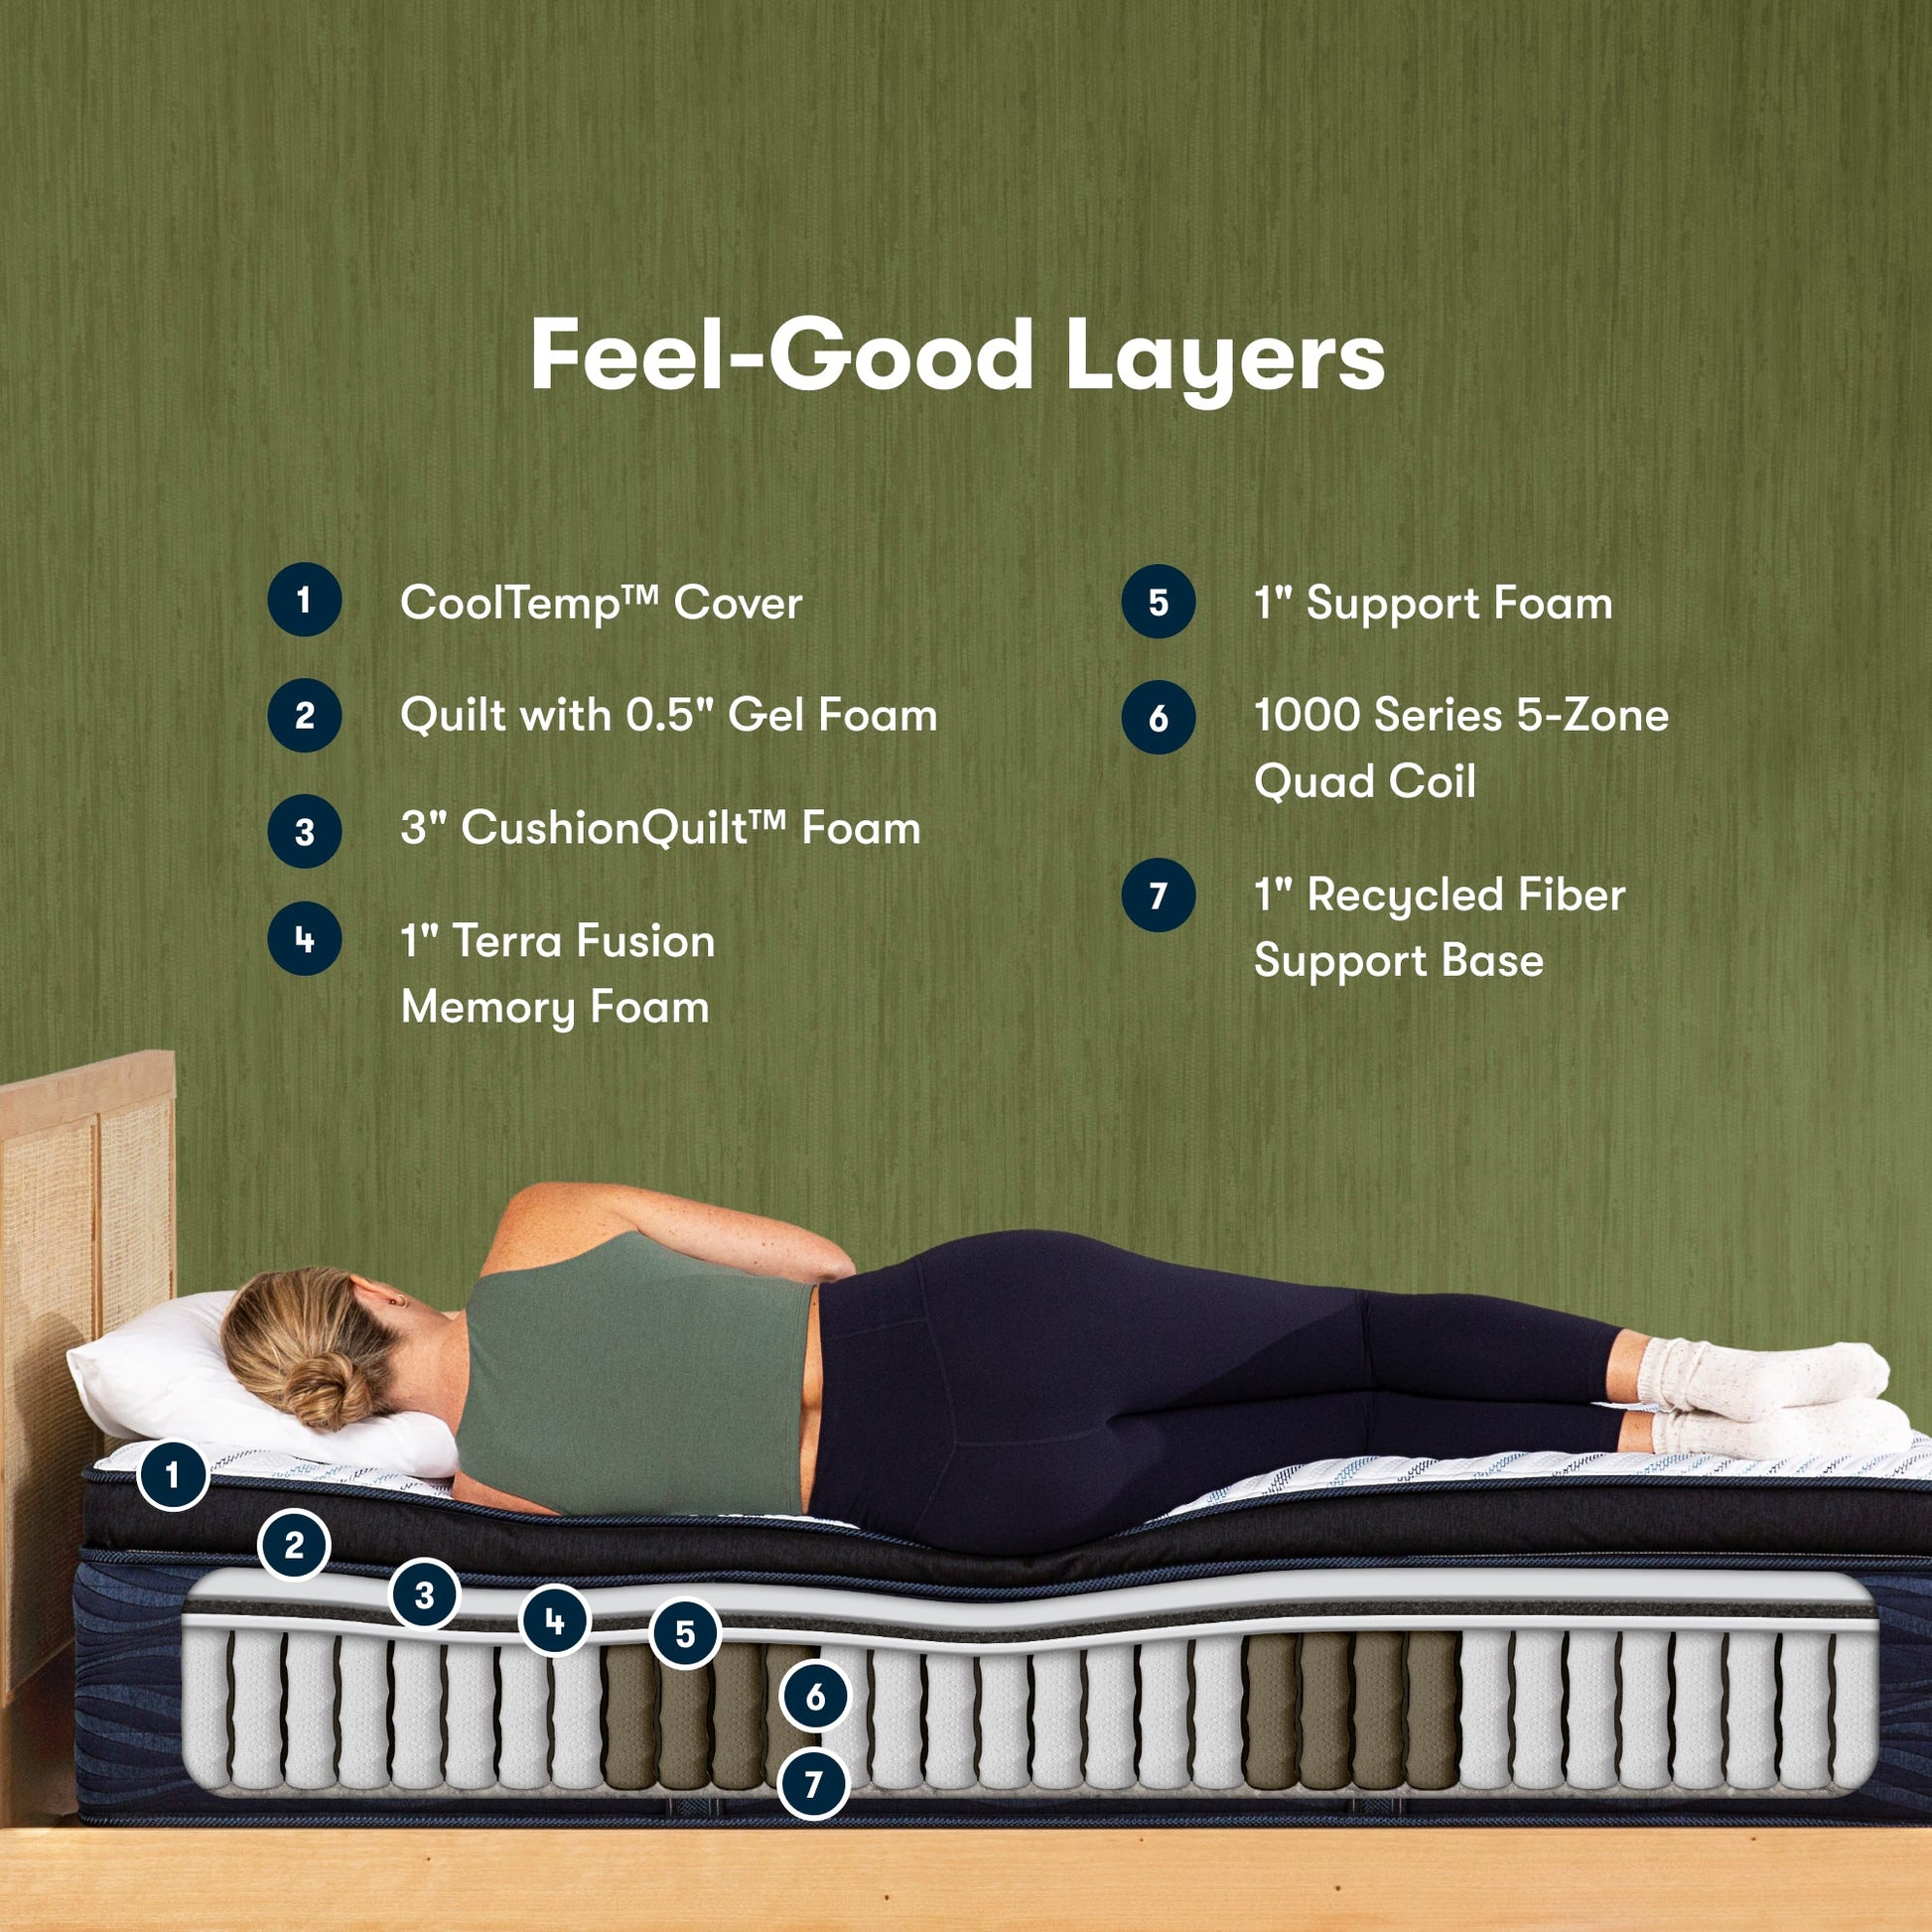 Serta iComfortECO Quilted Hybrid Firm Pillow Top Mattress Feel-Good Layers